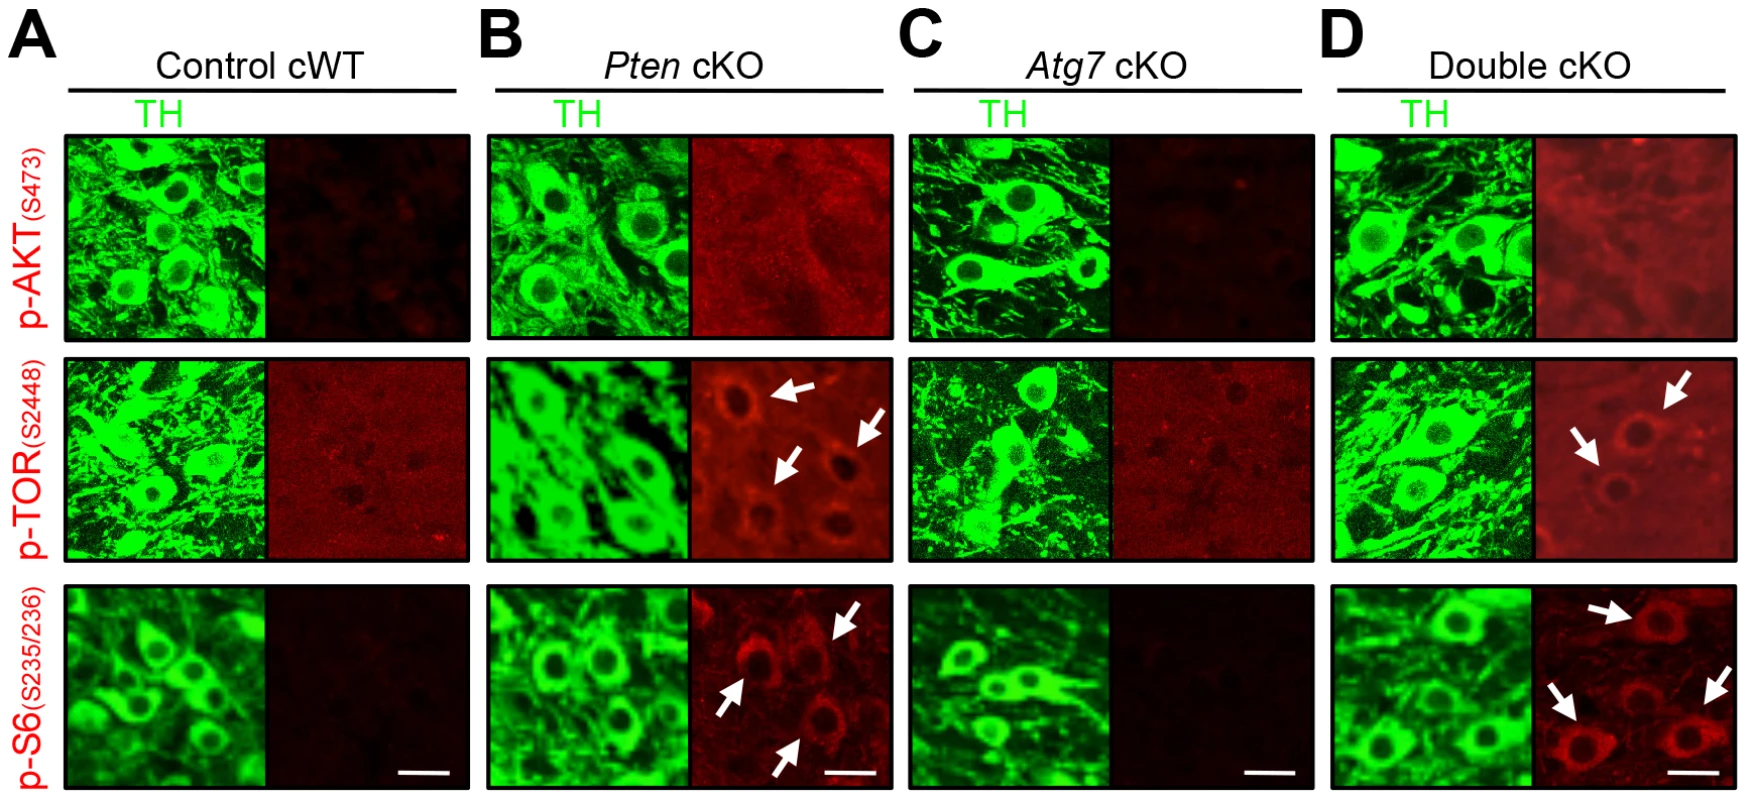 Characterization of PI3K/mTOR pathways in TH-positive DA neurons of <i>Atg7</i> and/or <i>Pten</i> cKO mice.